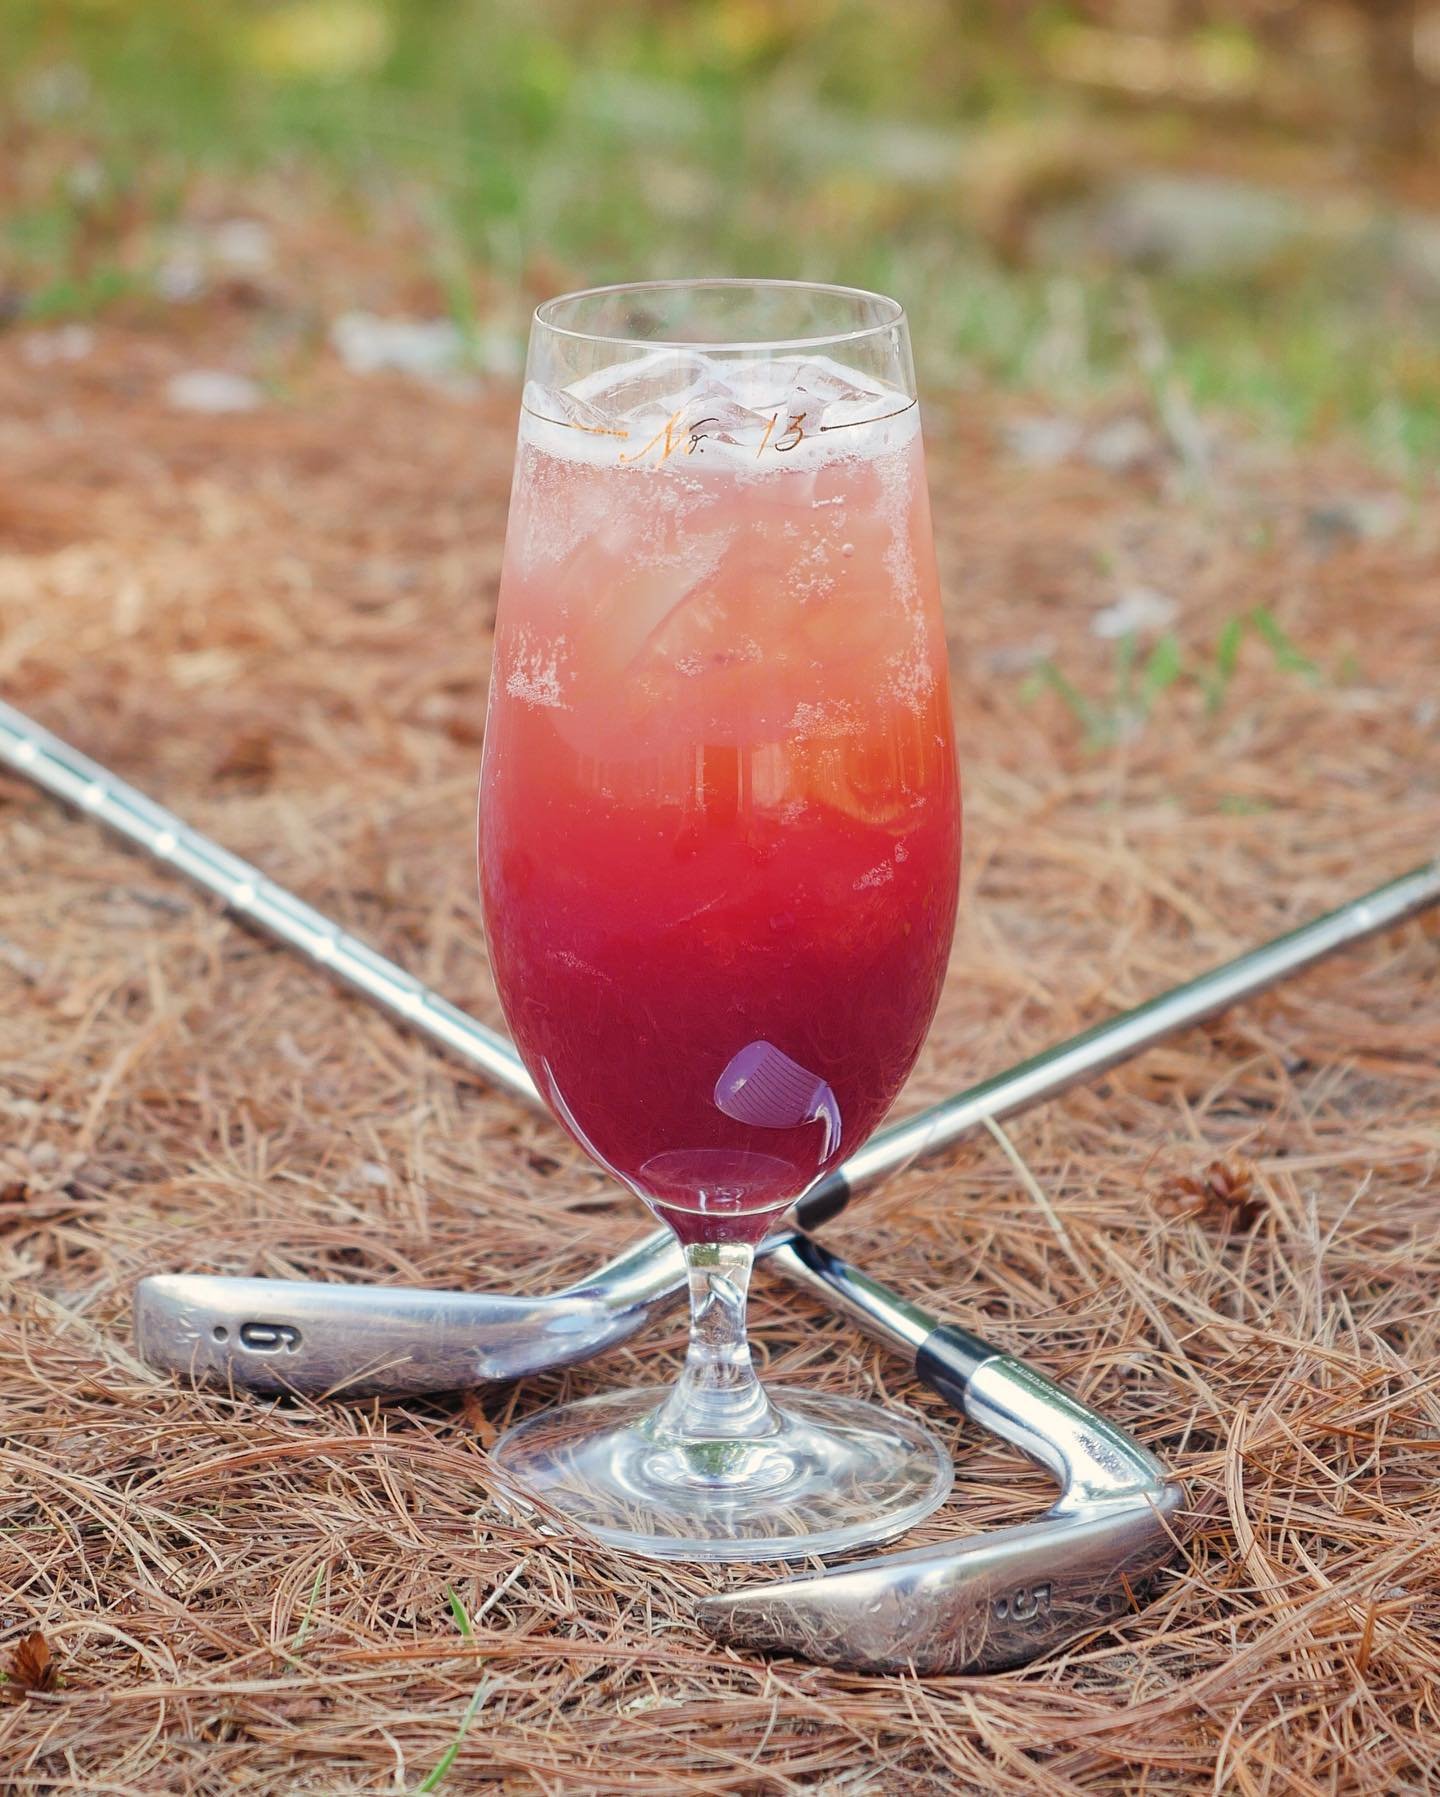 In honor of the Master&rsquo;s starting today (co-founder Loghan is quite the fan) here&rsquo;s a masters themed cocktail&hellip;

&ldquo;Flowering Peach&rdquo;

Named after hole number three at Augusta, this is a very simple and straightforward elix